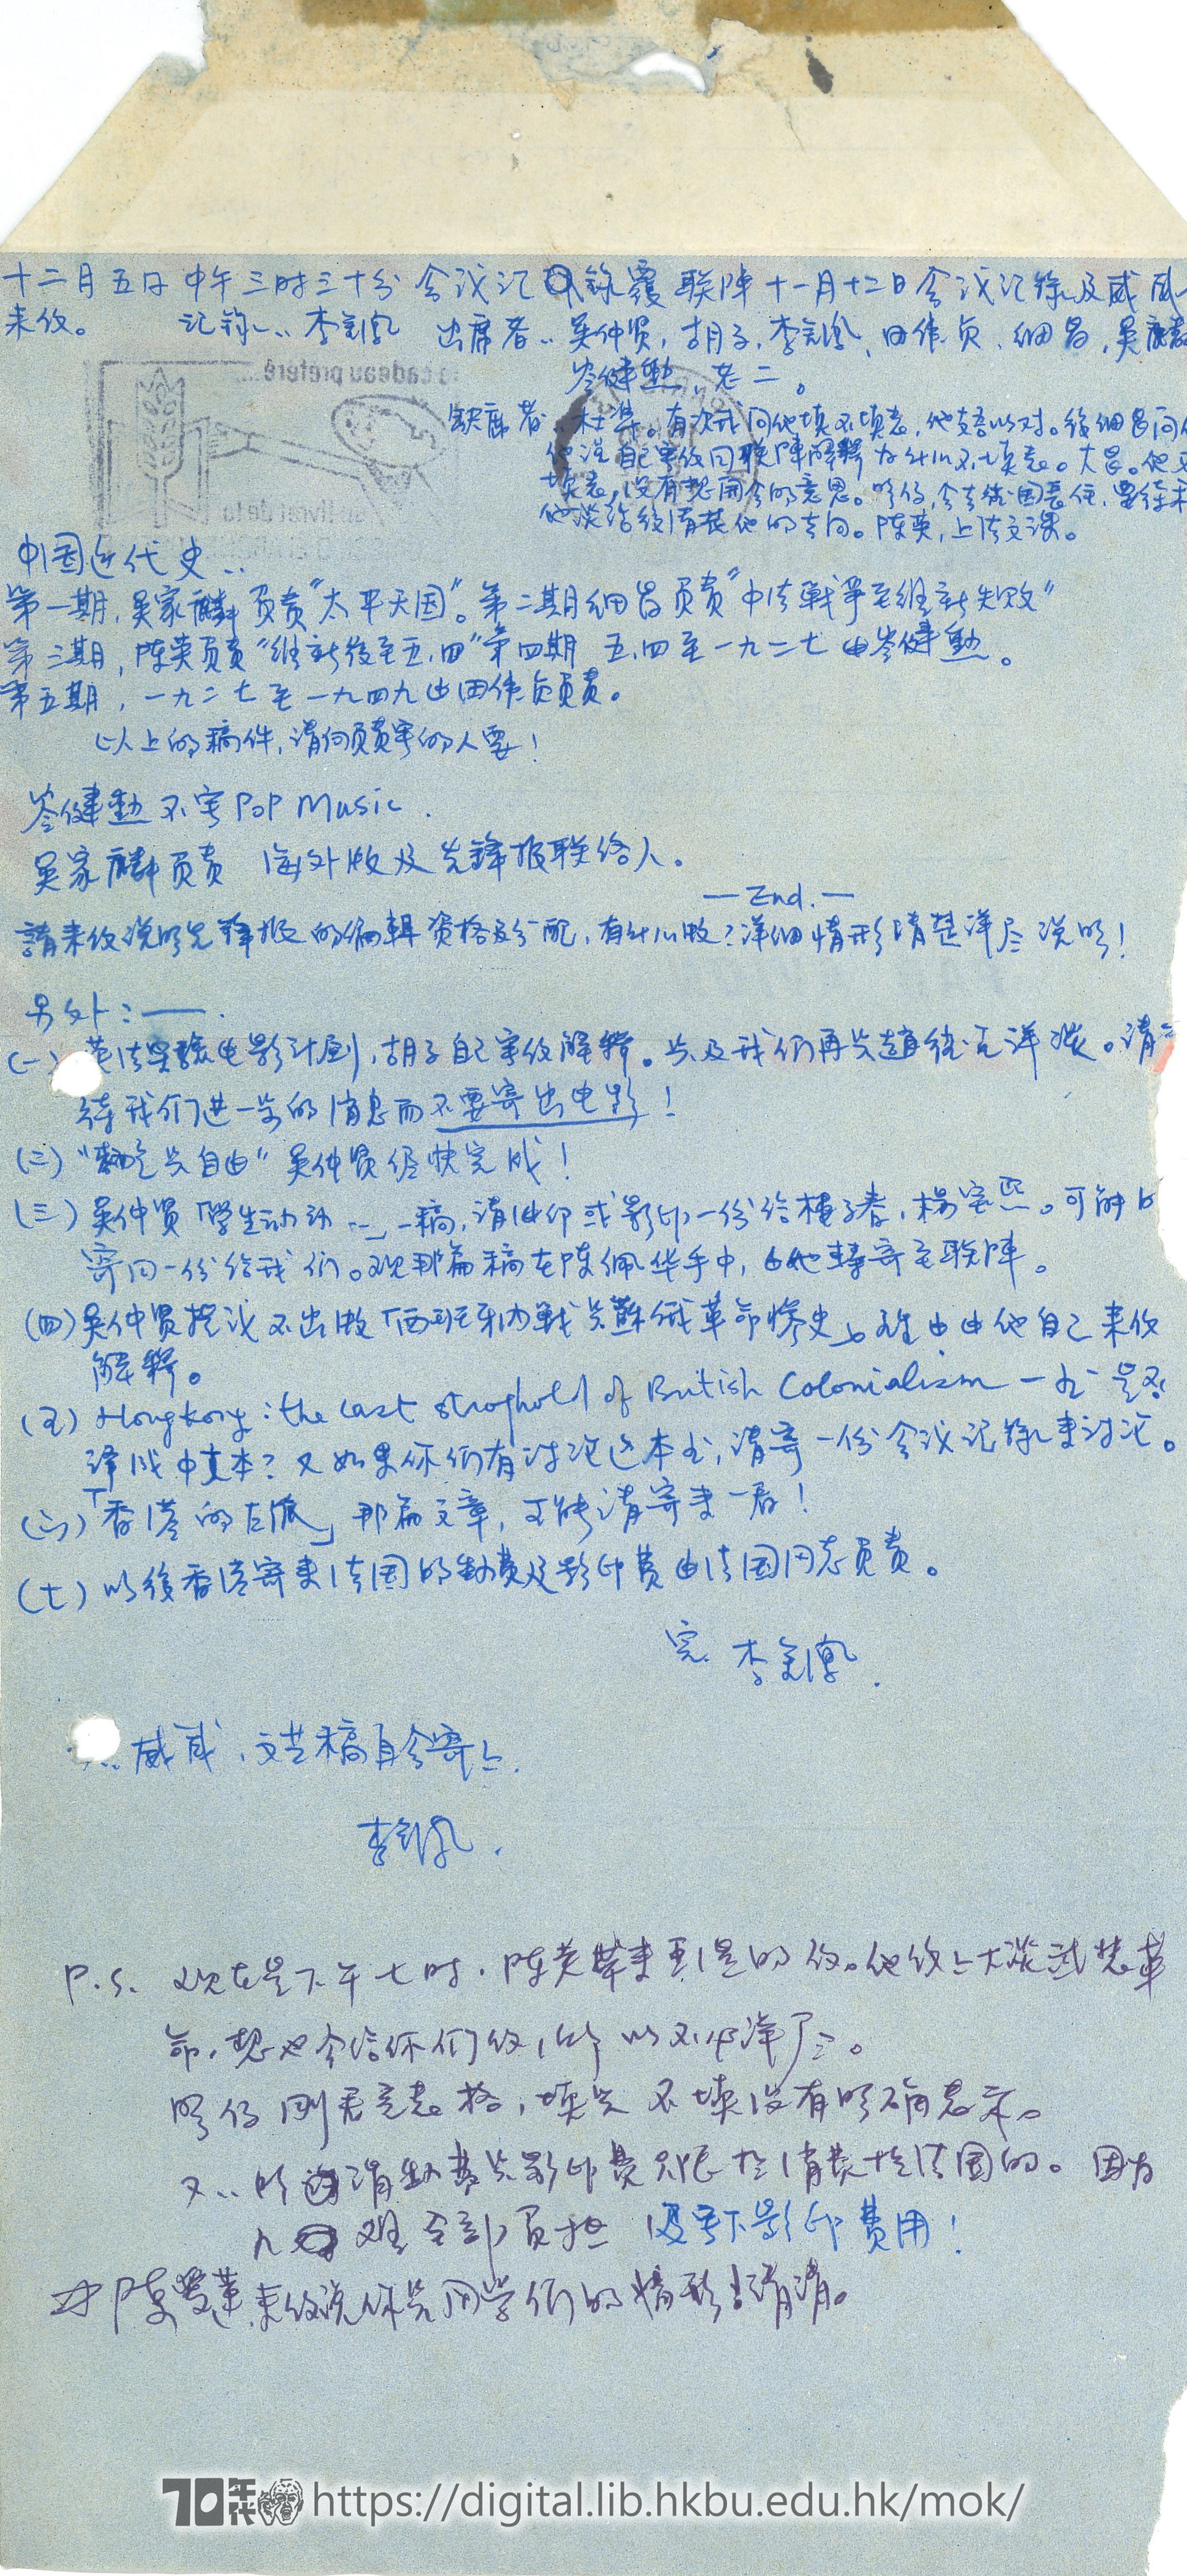   Letter From Li Kam Fung to United Front (meeting record)  